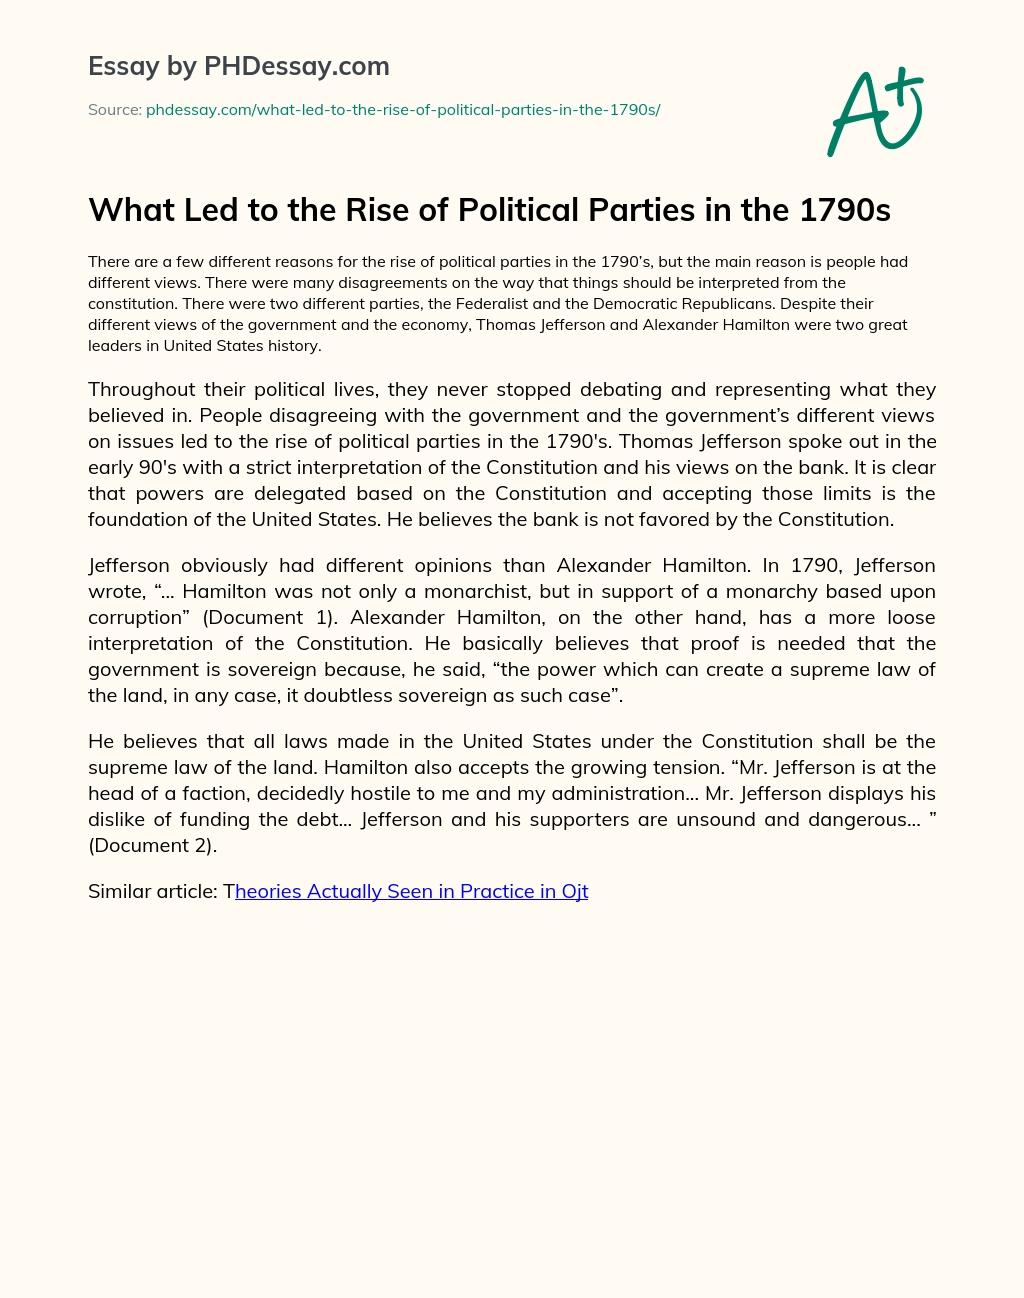 What Led to the Rise of Political Parties in the 1790s essay